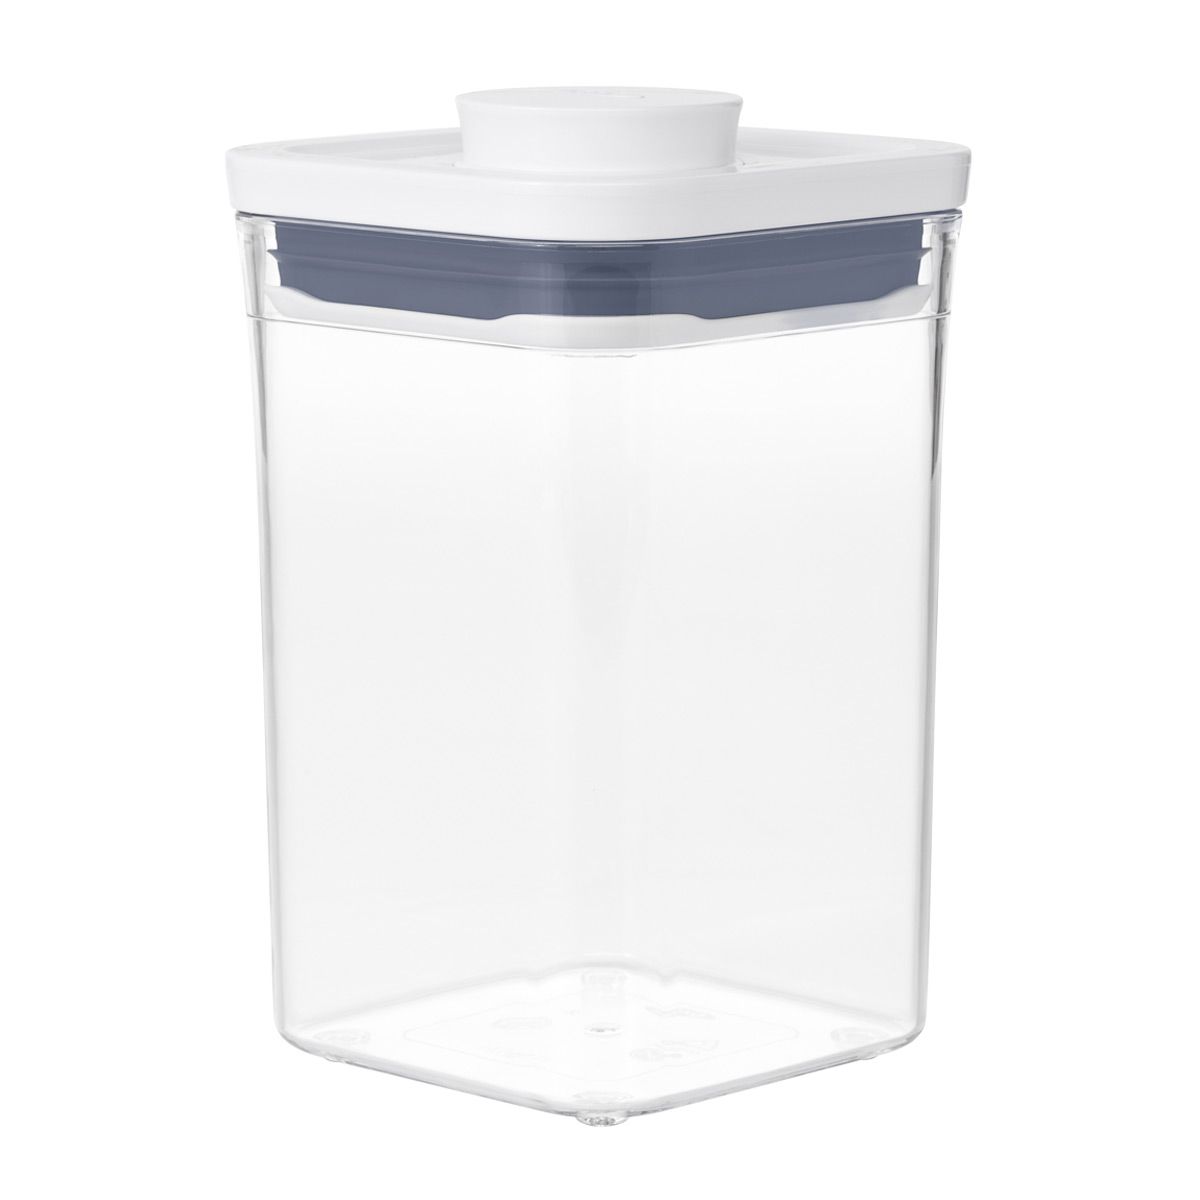 OXO 1.1 qt. Short Small Square POP Container Short | The Container Store